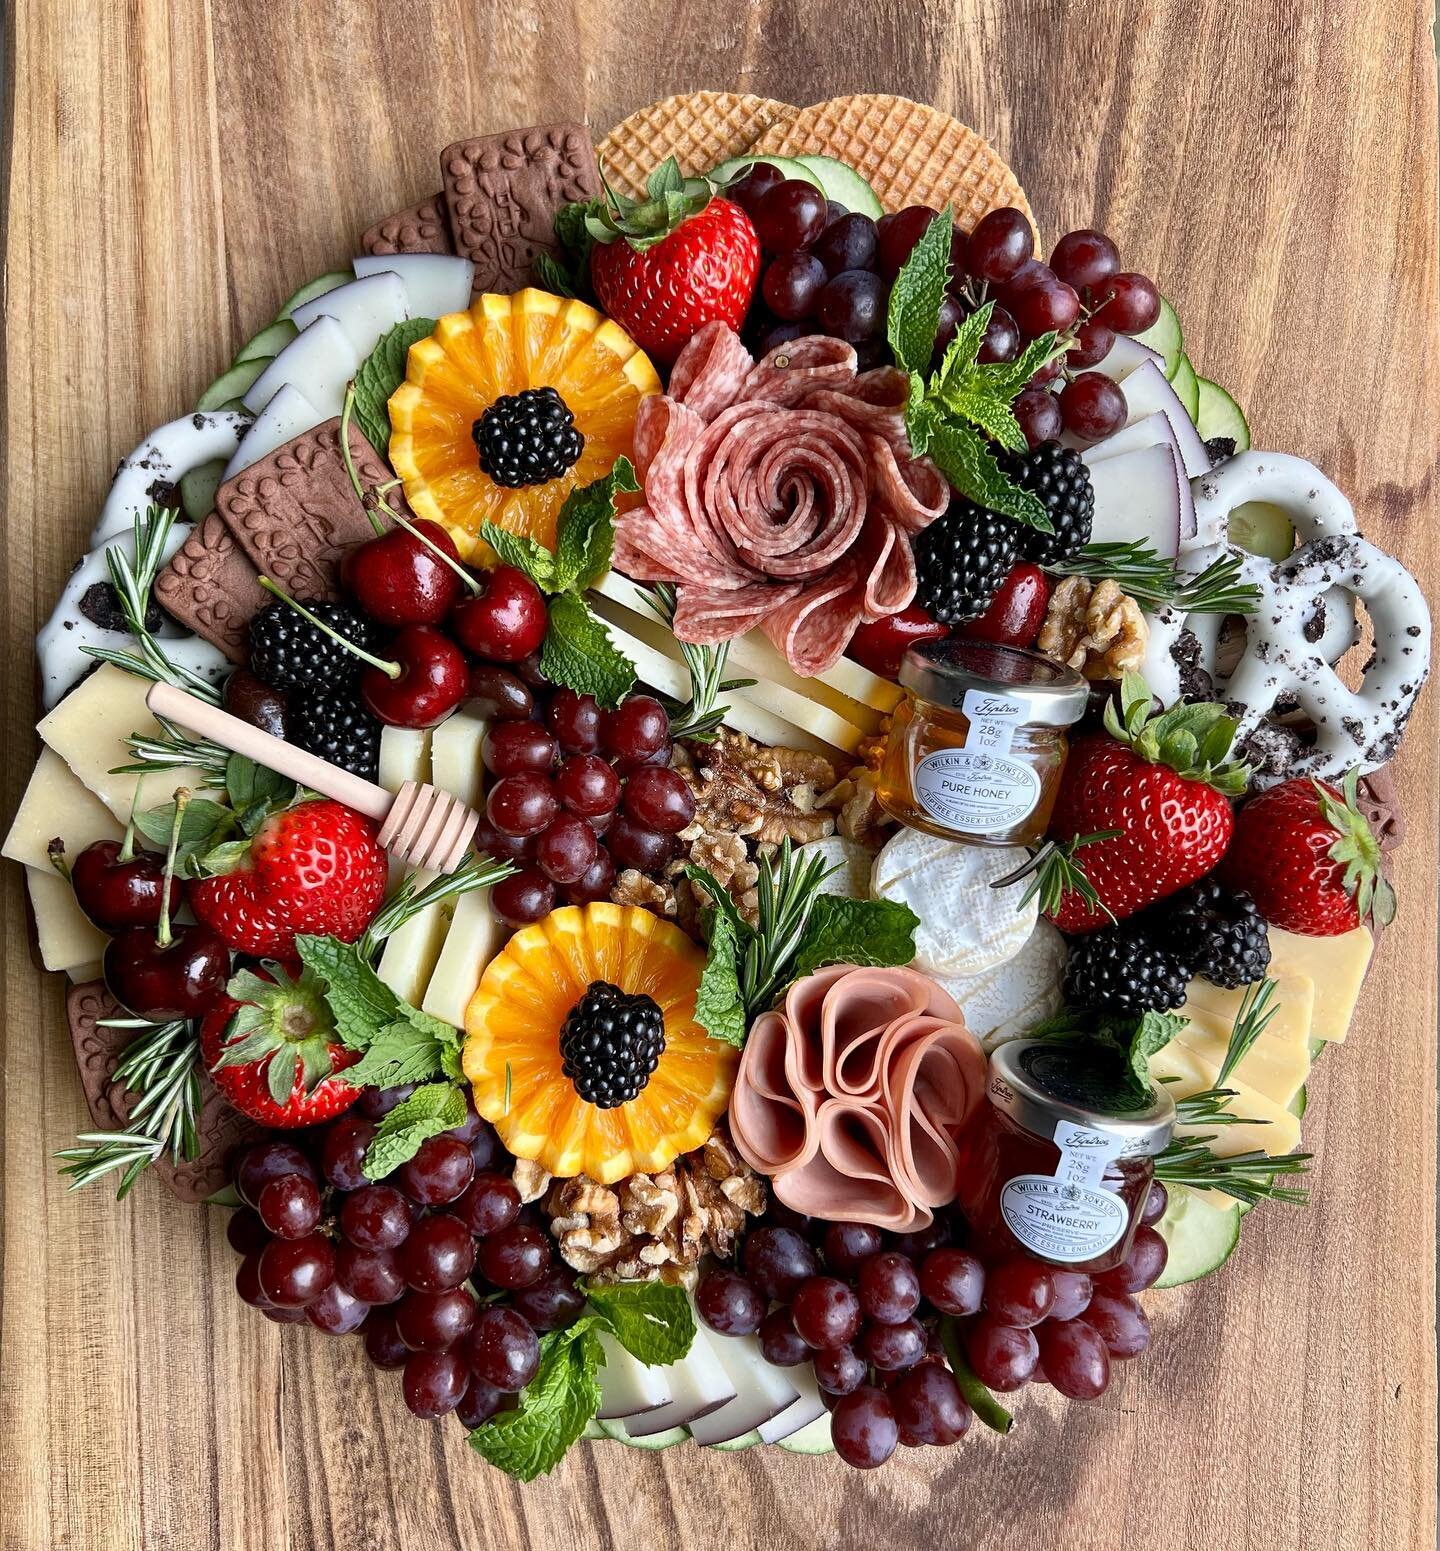 Looking to Thank Your Terrific Team? 🙏🥰🙏 Treat them to a gorgeous Gratitude Grazer Board 🙏🥰🙏 

Show your deep appreciation with an amazing array of artisan cheese &amp; charcuterie, fresh seasonal produce, nuts, gourmet cookies &amp; chocolate,